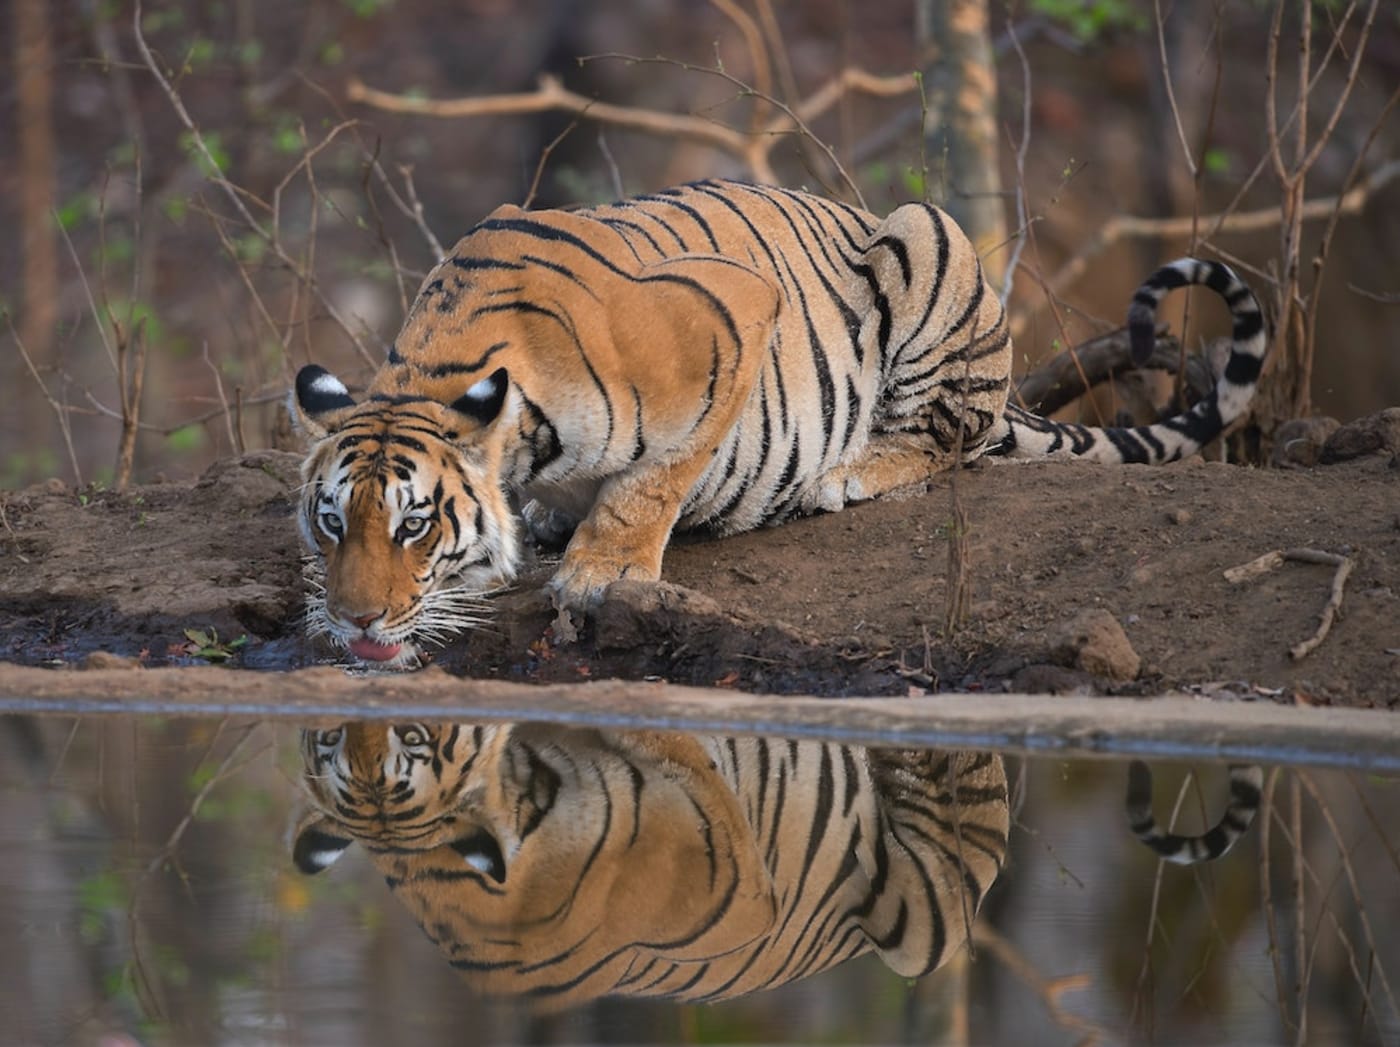 A tigress quenching her thirst at a waterhole in Pench Tiger Reserve